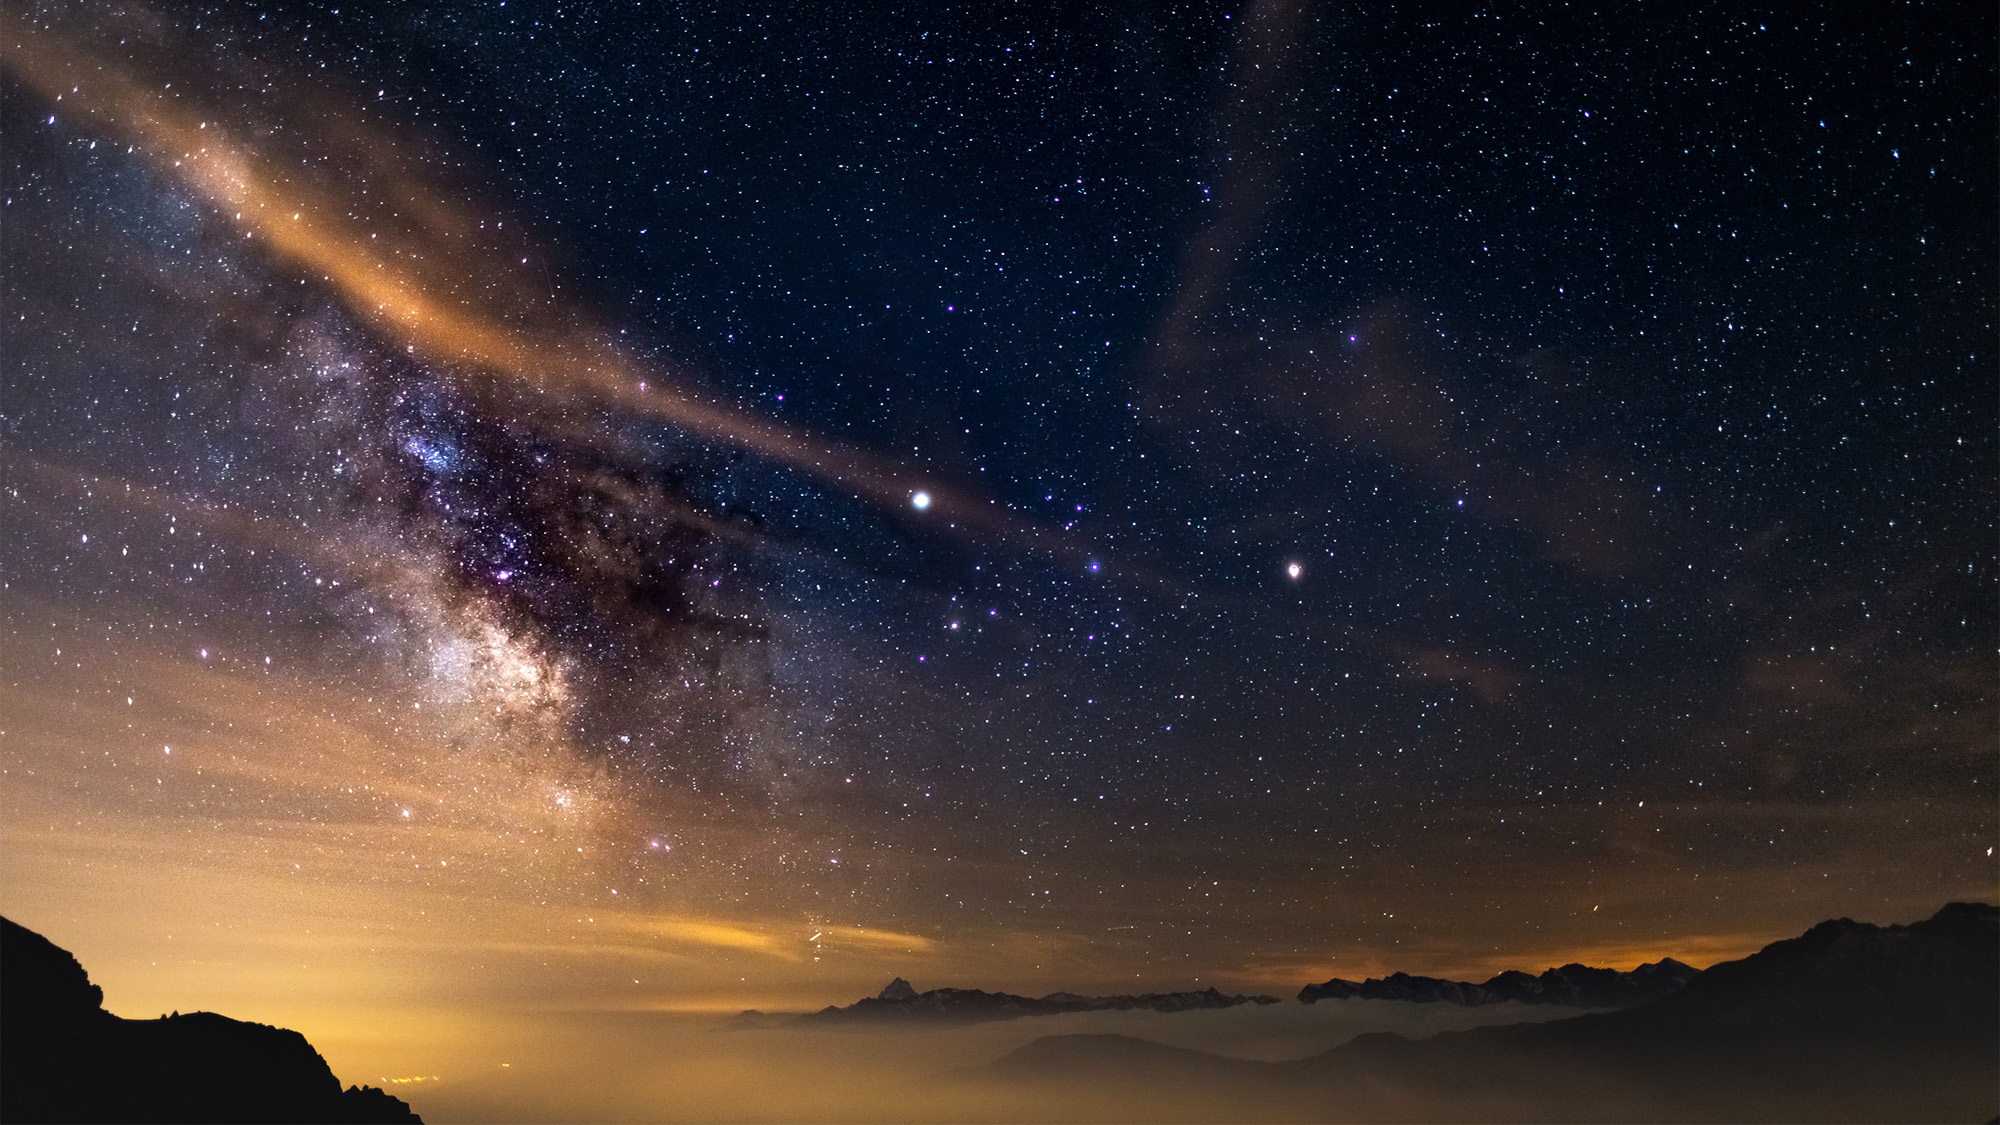 A view of space with the Milky Way, planets and stars visible in the dark sky